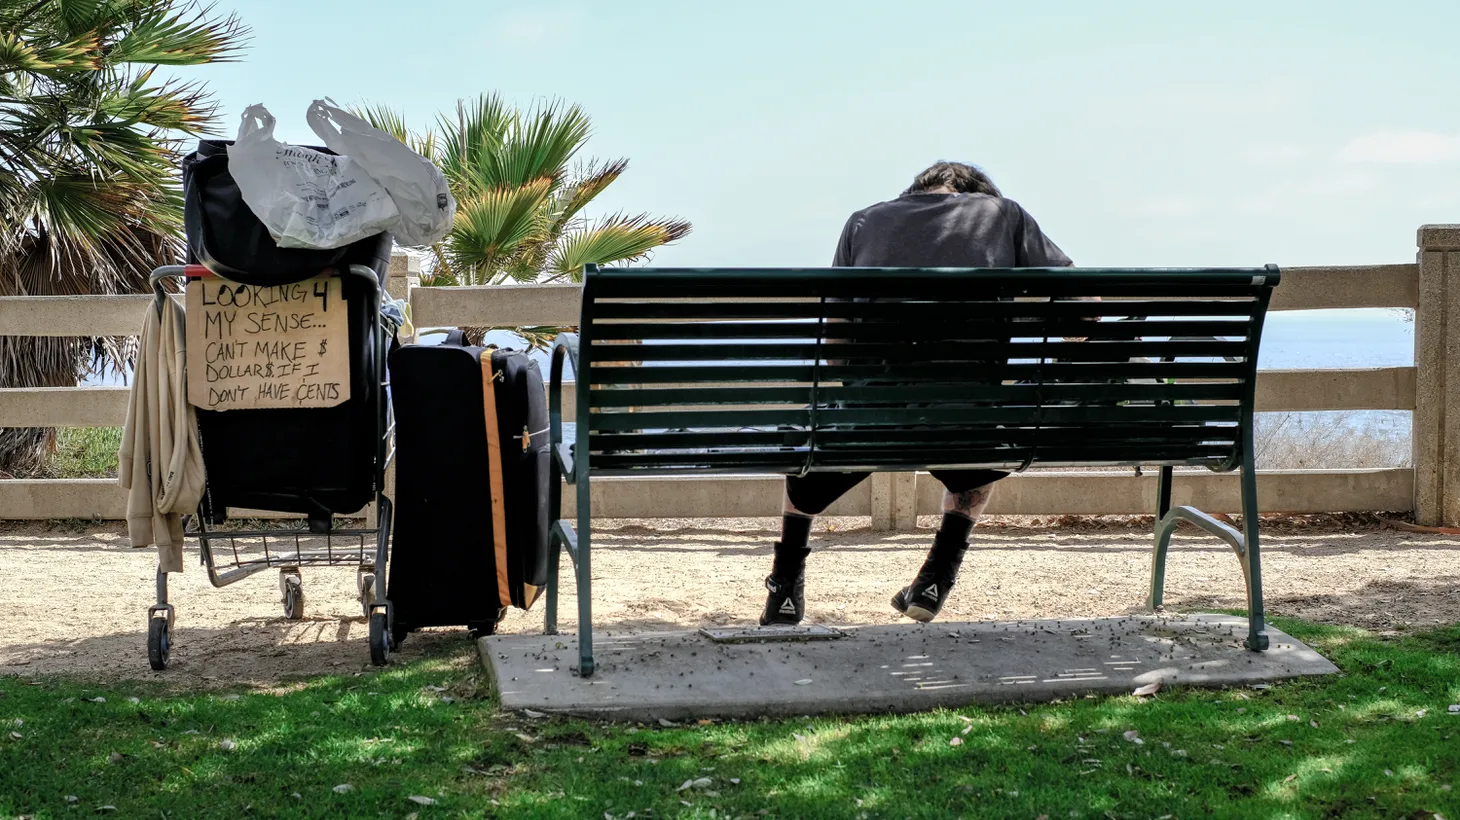 An unhoused person sits on a bench in Palisades Park in Santa Monica. His cart of possessions includes a sign that says, “Looking 4 my sense … can’t make $ dollars $ if I don’t have cents.” July 25, 2022.